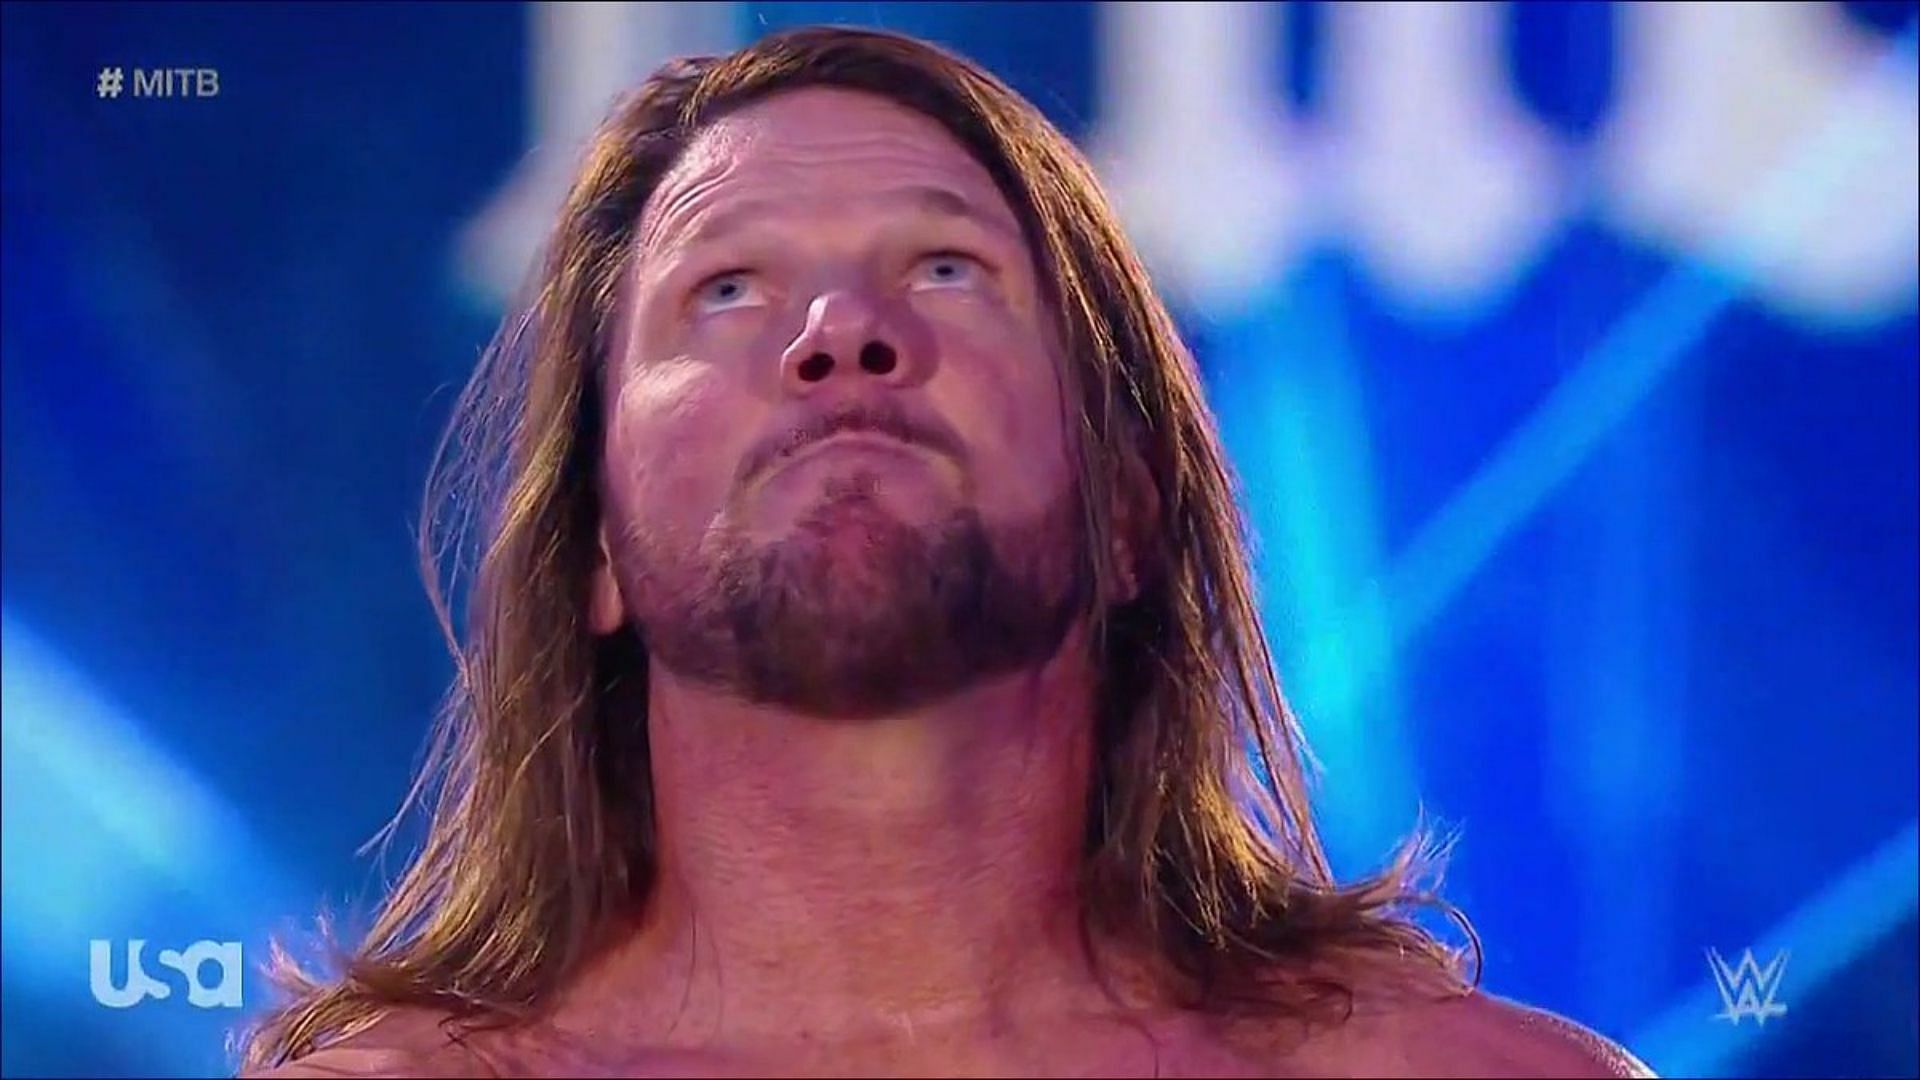 AJ Styles was once quite close with the star